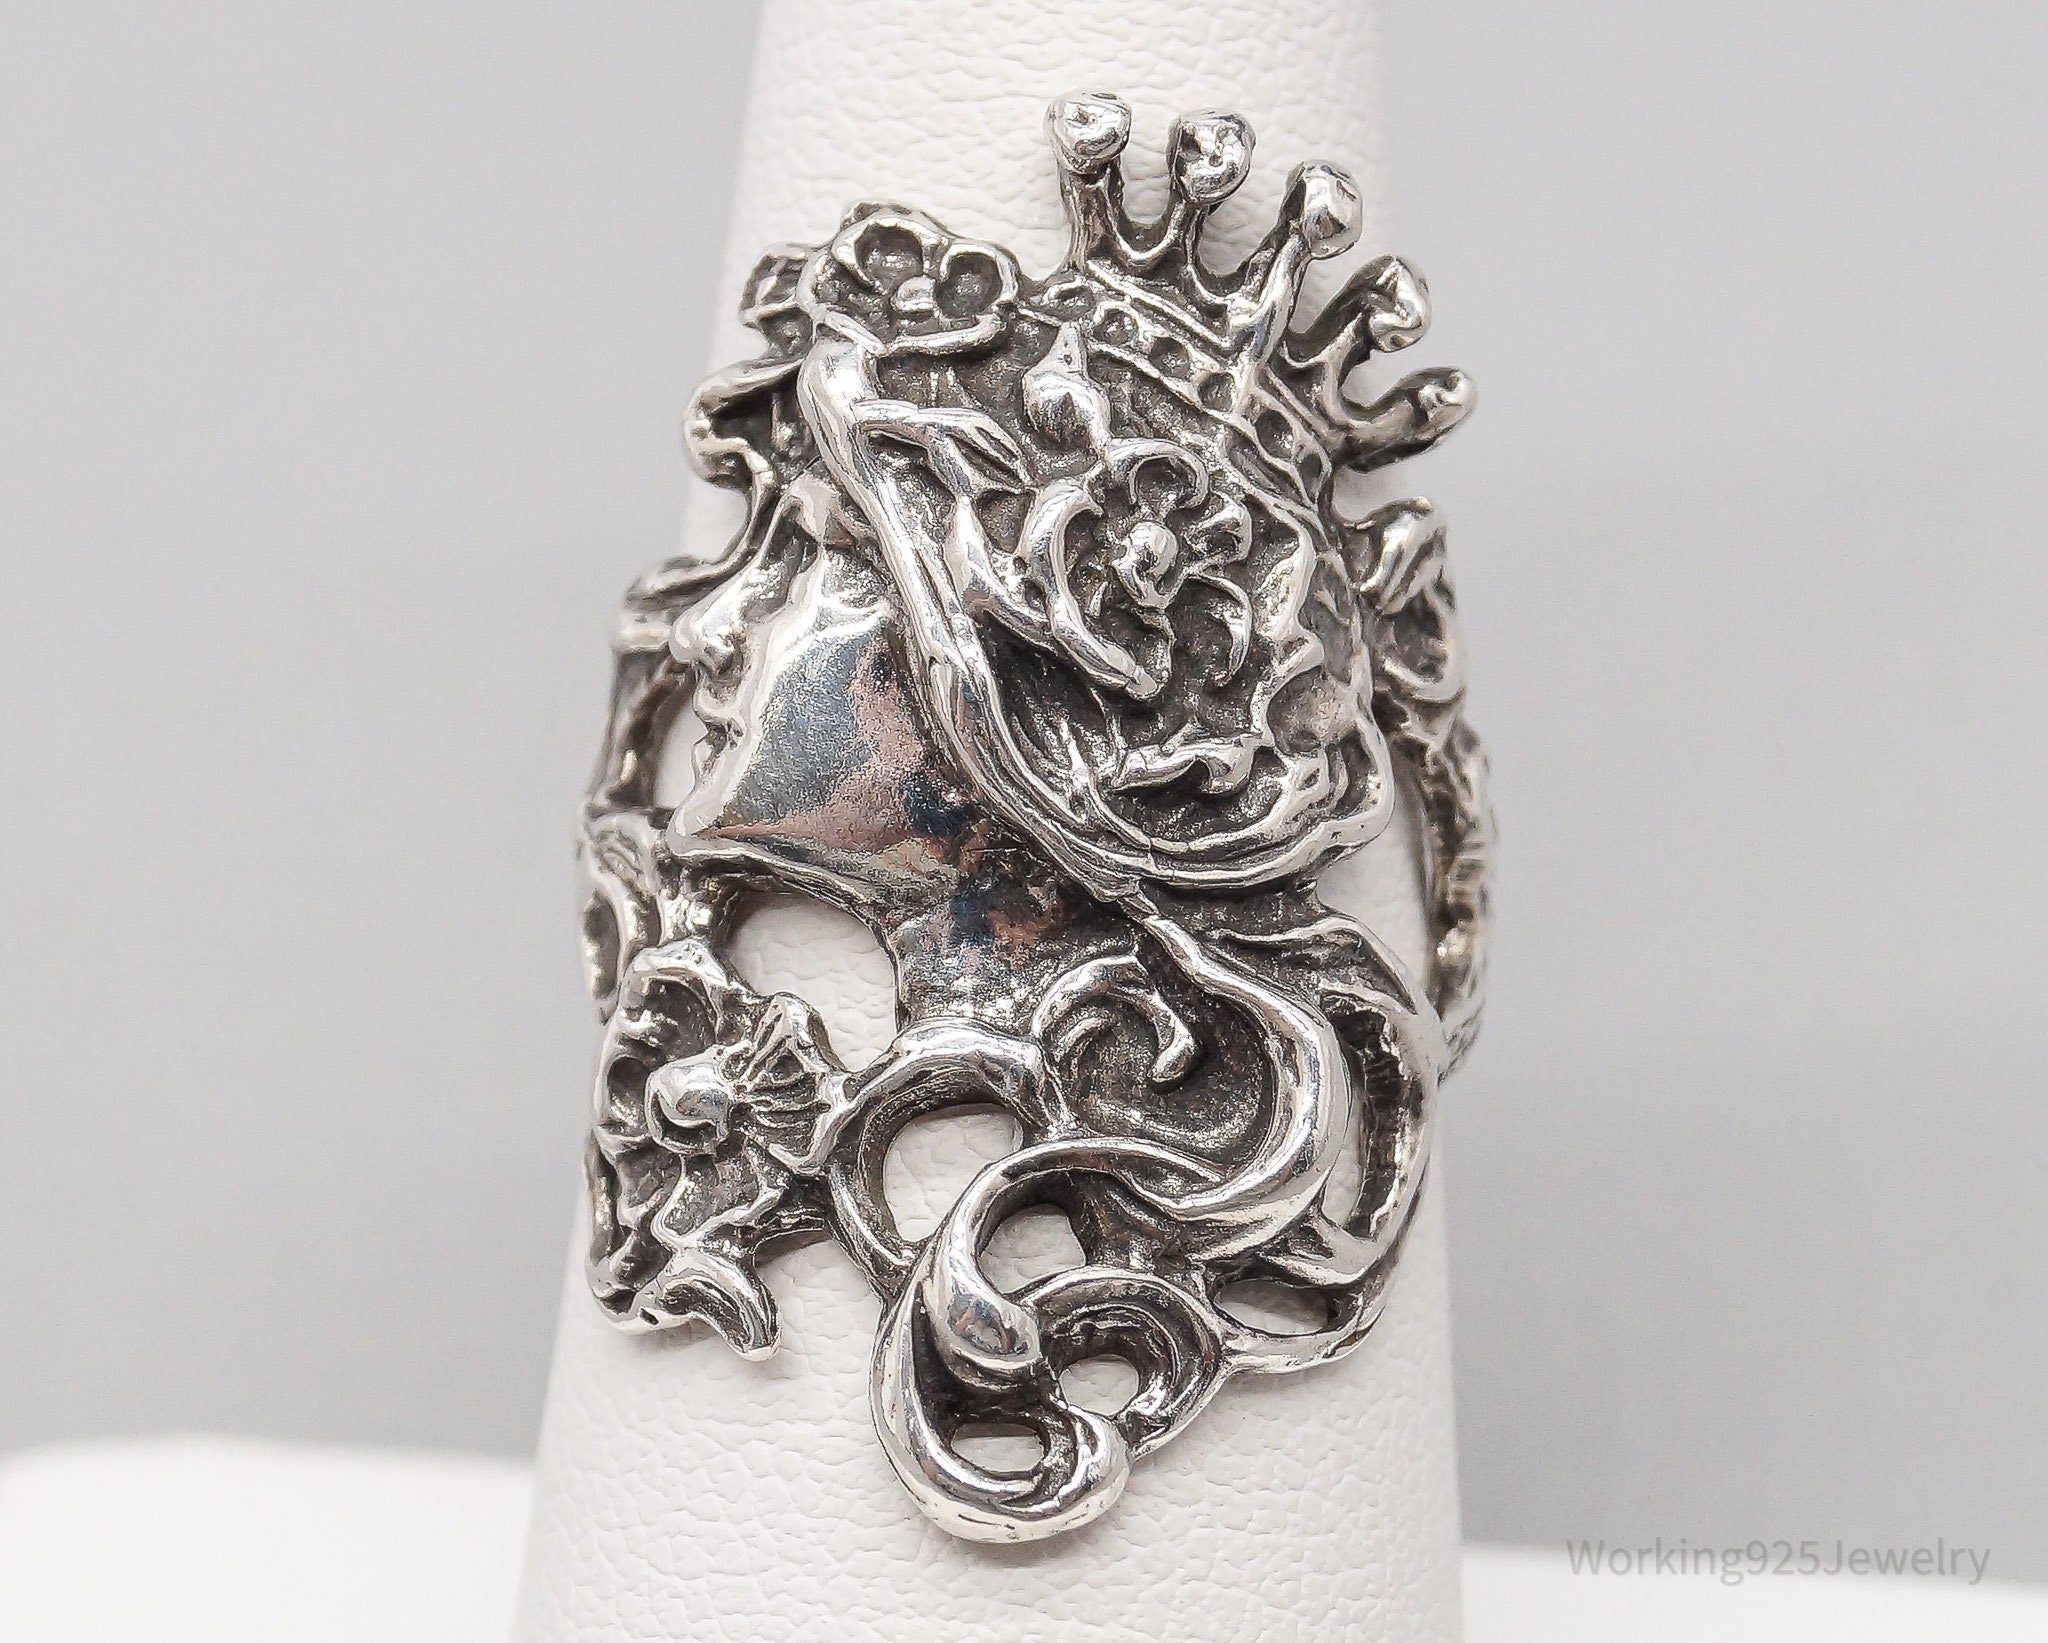 Vintage Art Nouveau Style Queen Sterling Silver Ring - Size 7